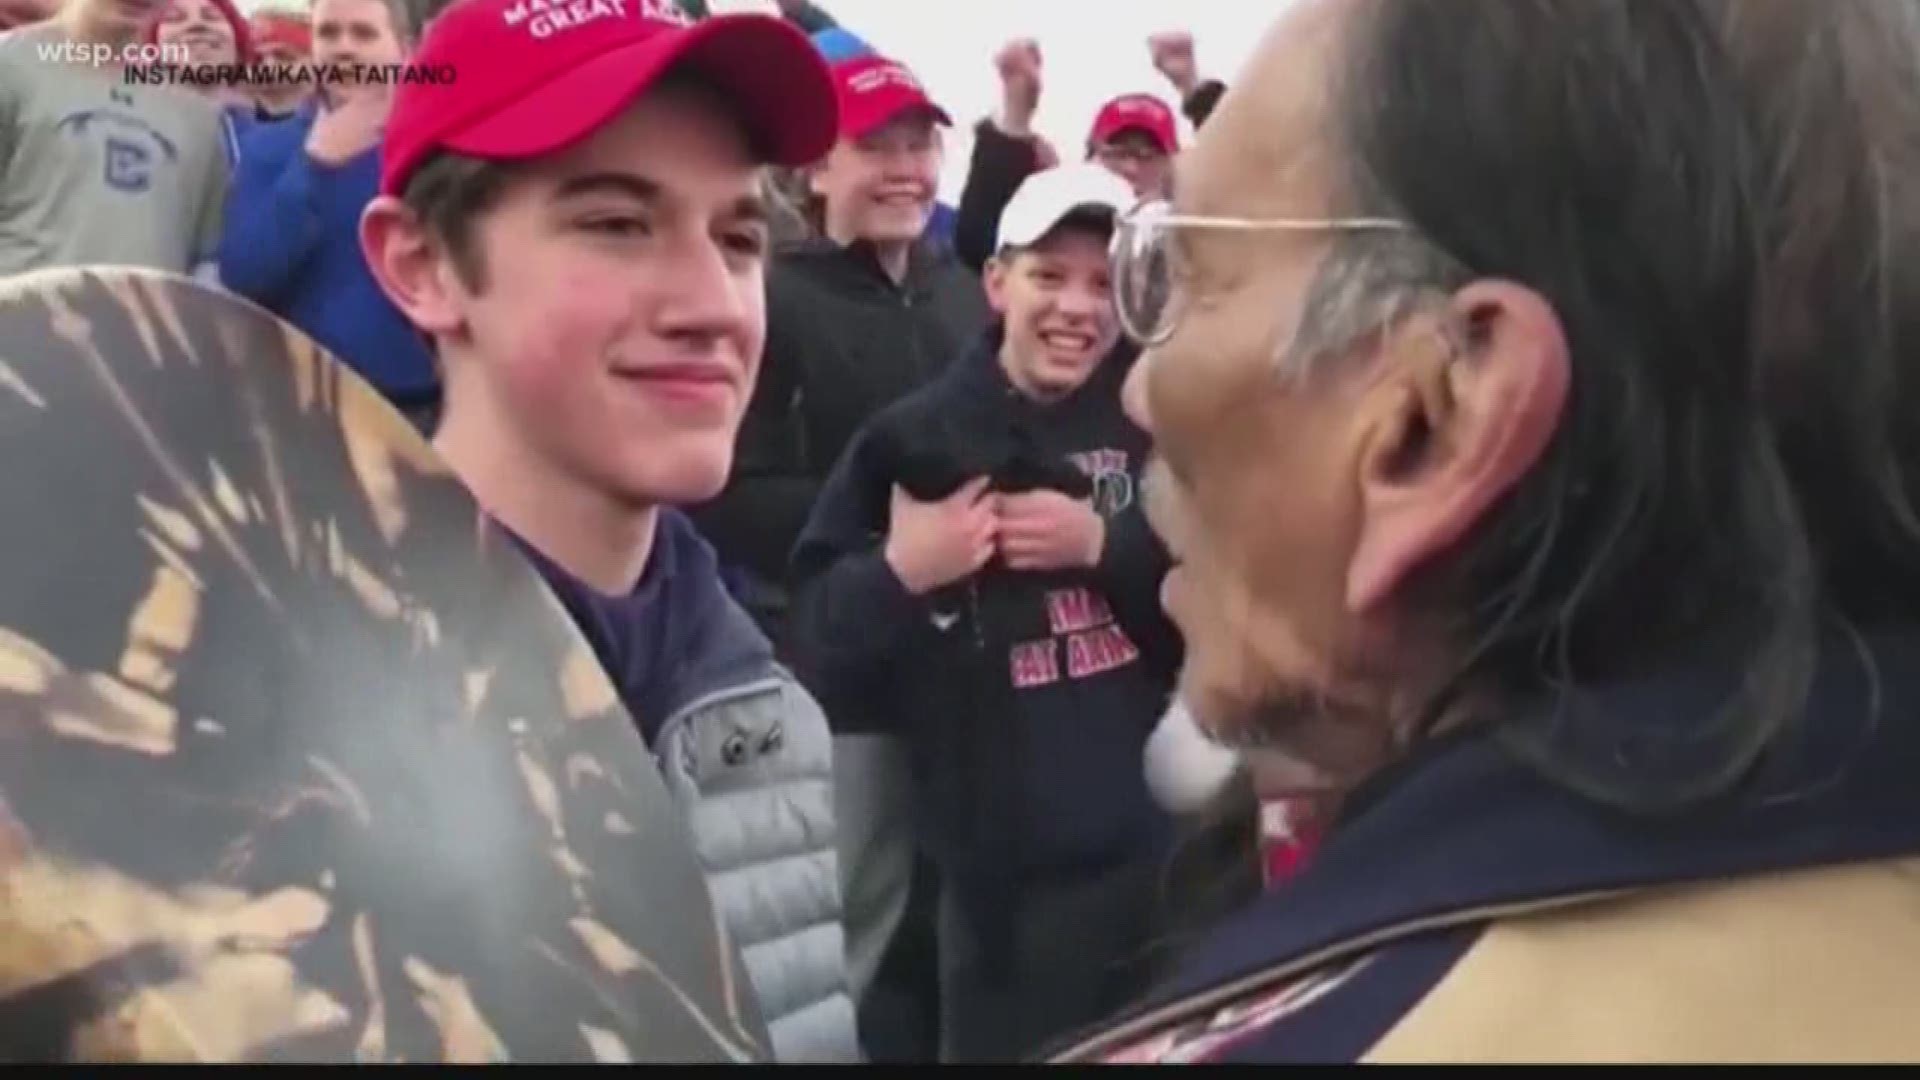 There is continued fallout from a video showing an encounter between a group of boys and a Native American man in Washington, D.C.